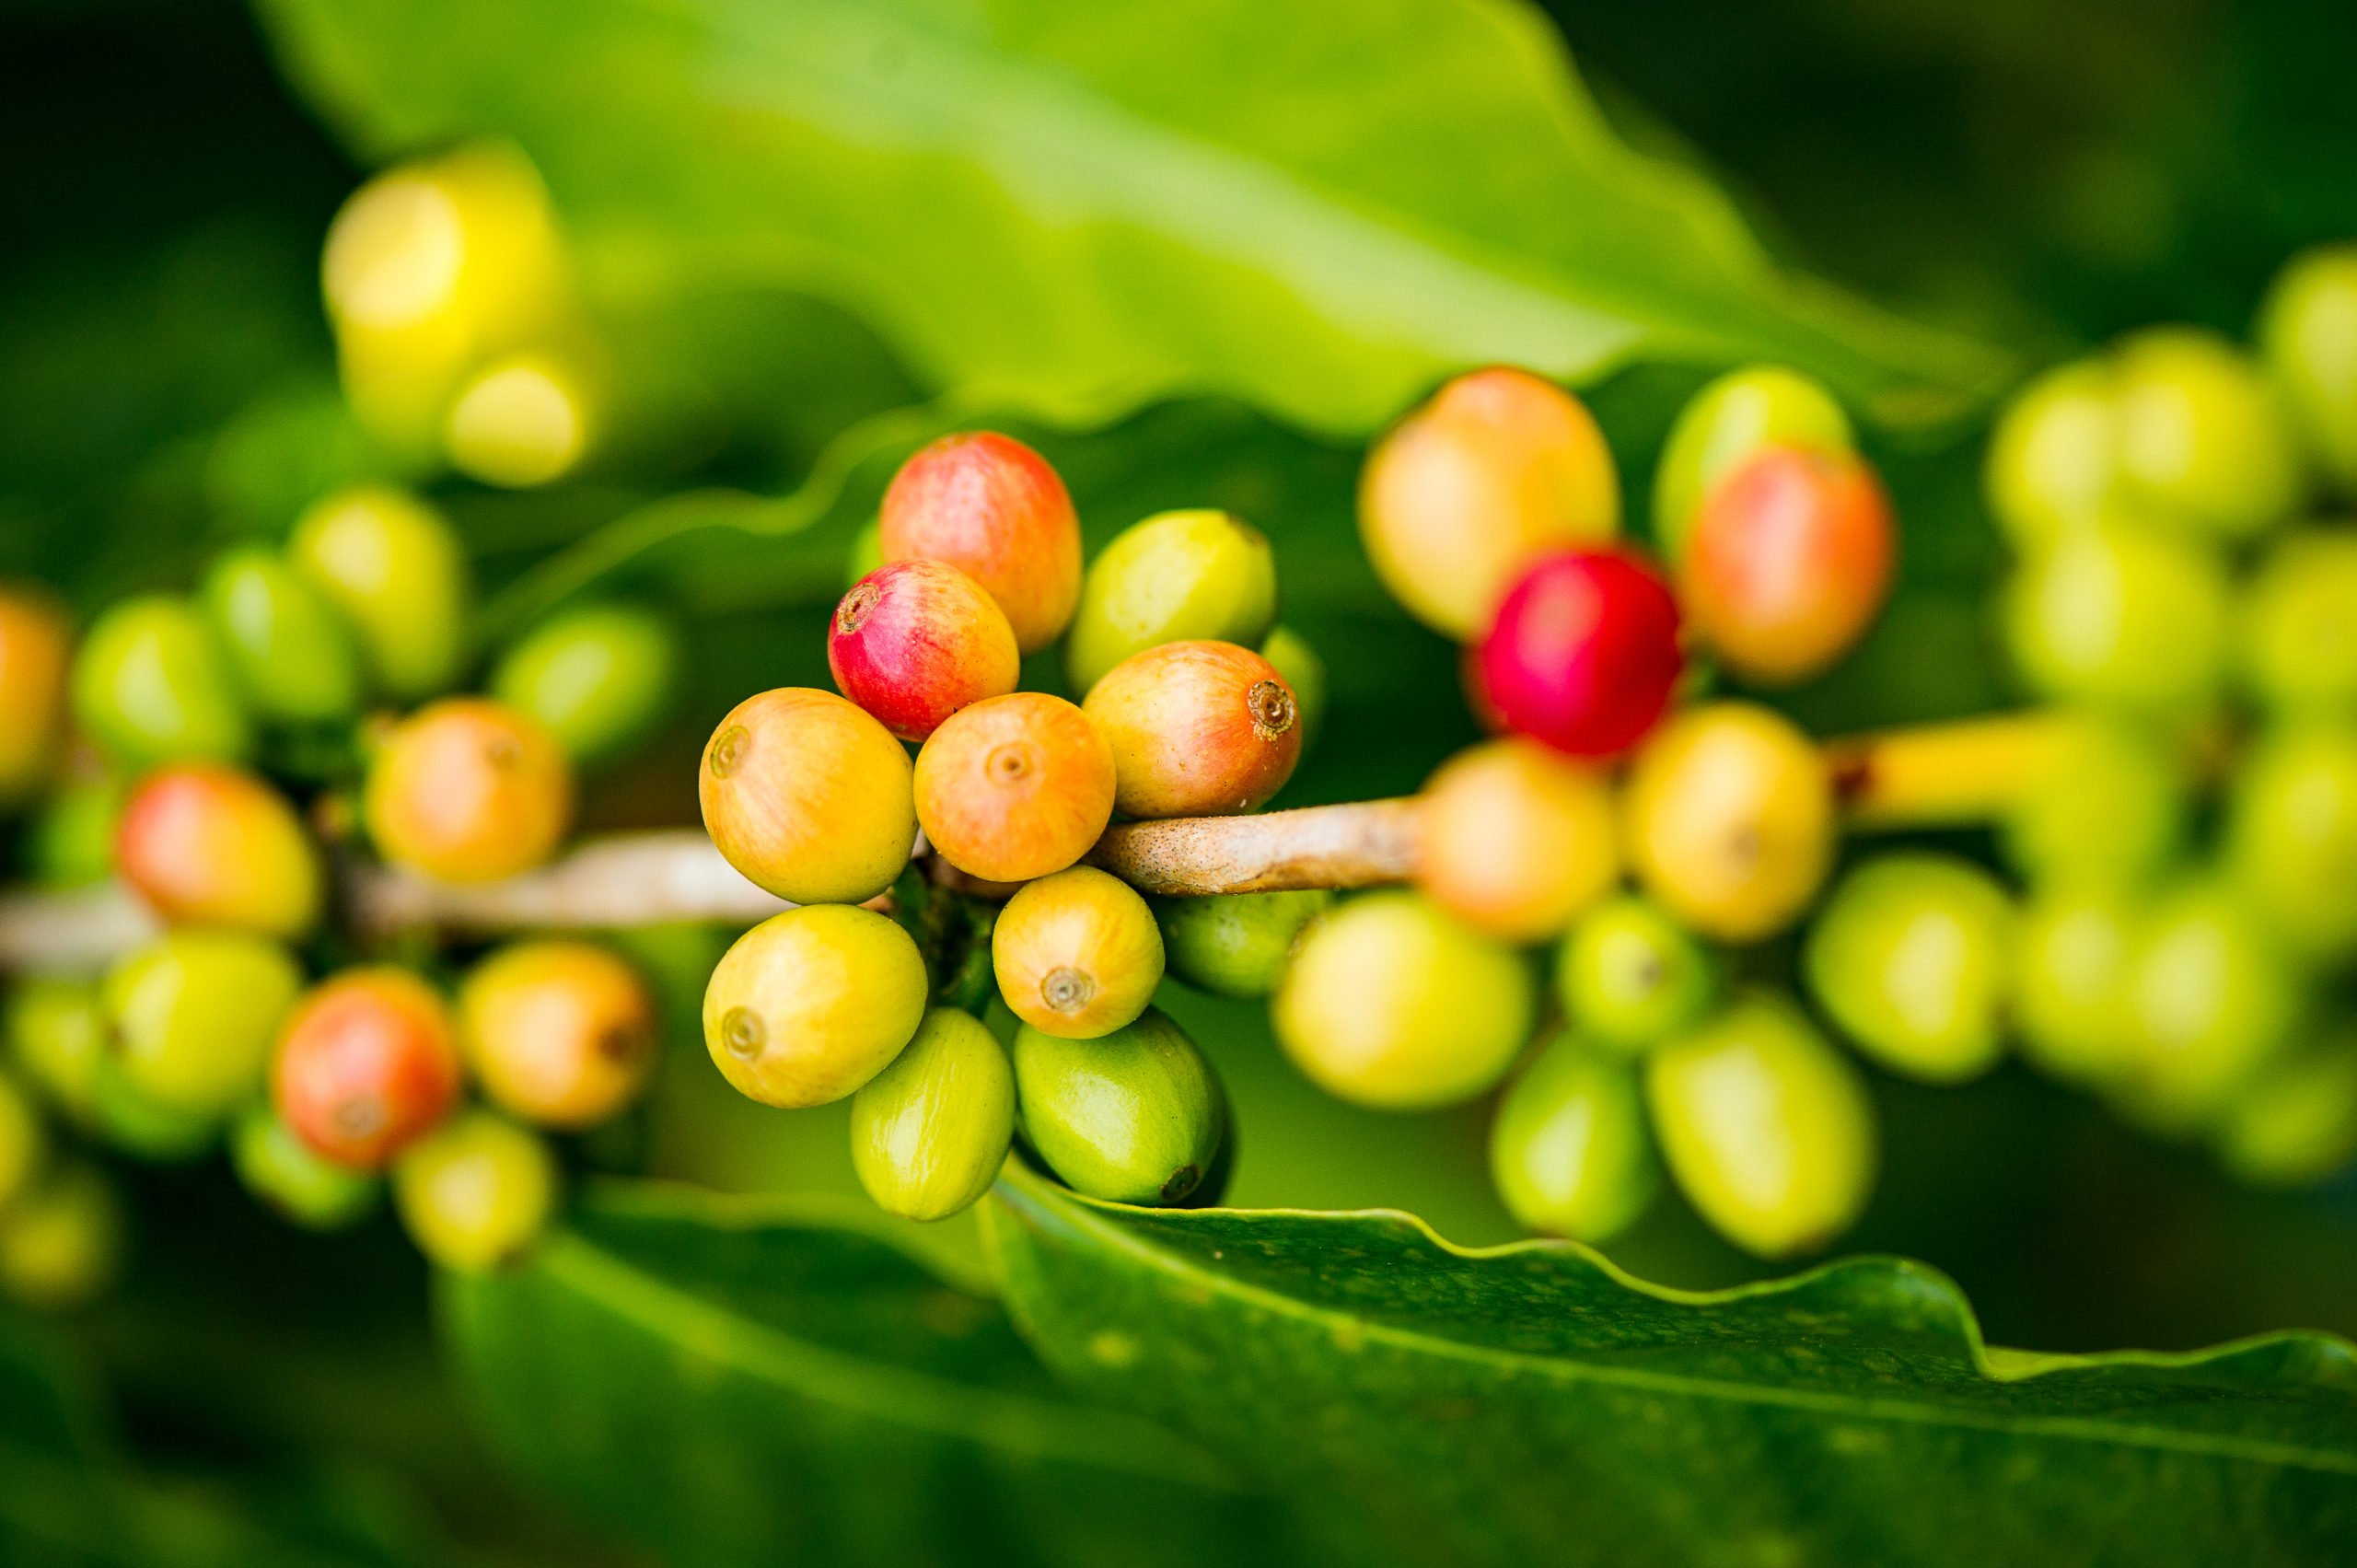 “Coffee:  The Magical Bean That Isn’t Just for Breakfast Anymore”